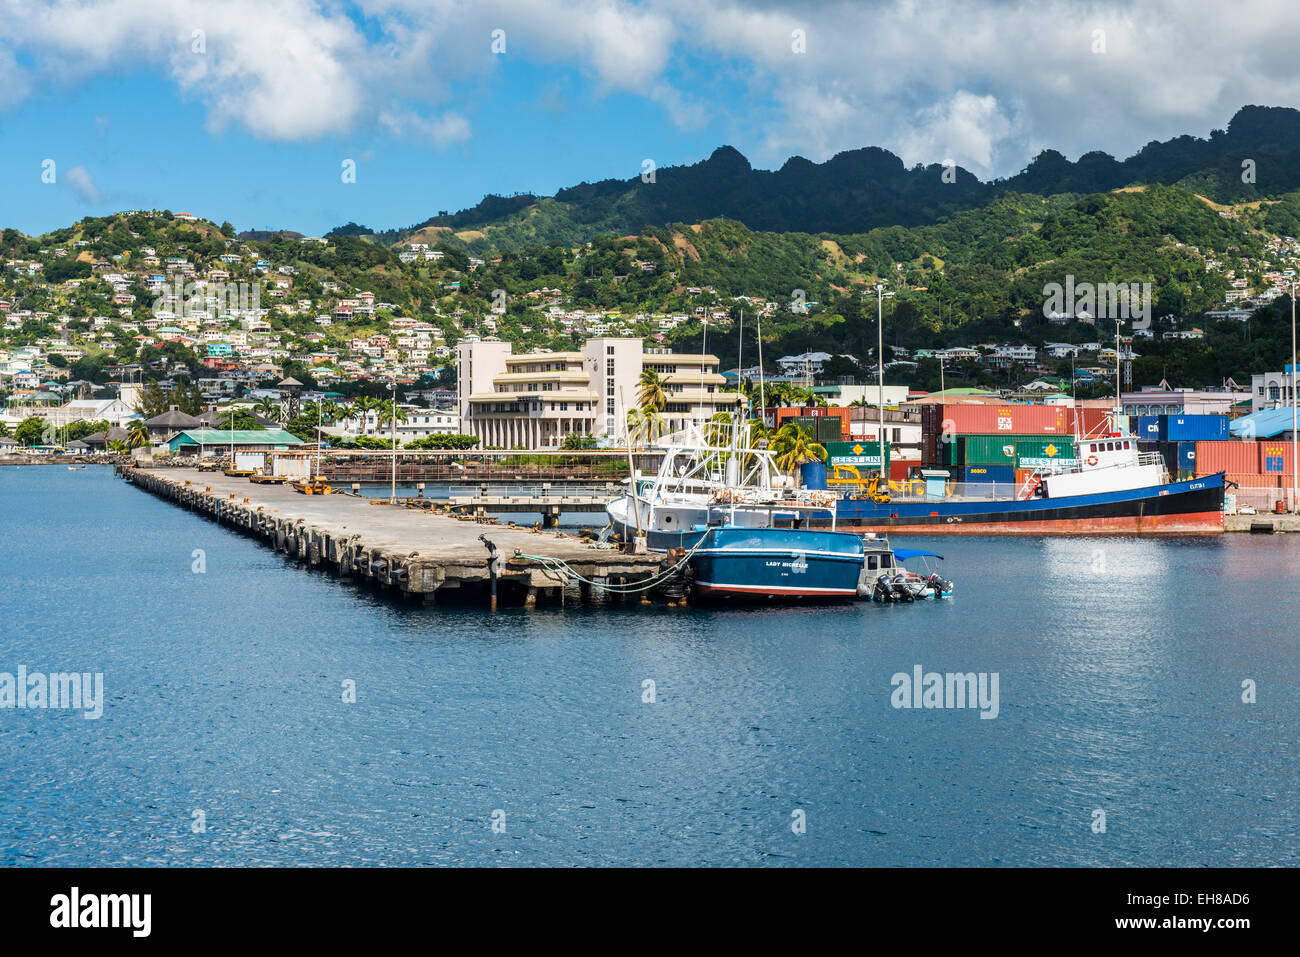 The harbour of Kingstown, St. Vincent, St. Vincent and the Grenadines, Windward Islands, West Indies, Caribbean, Central America Stock Photo